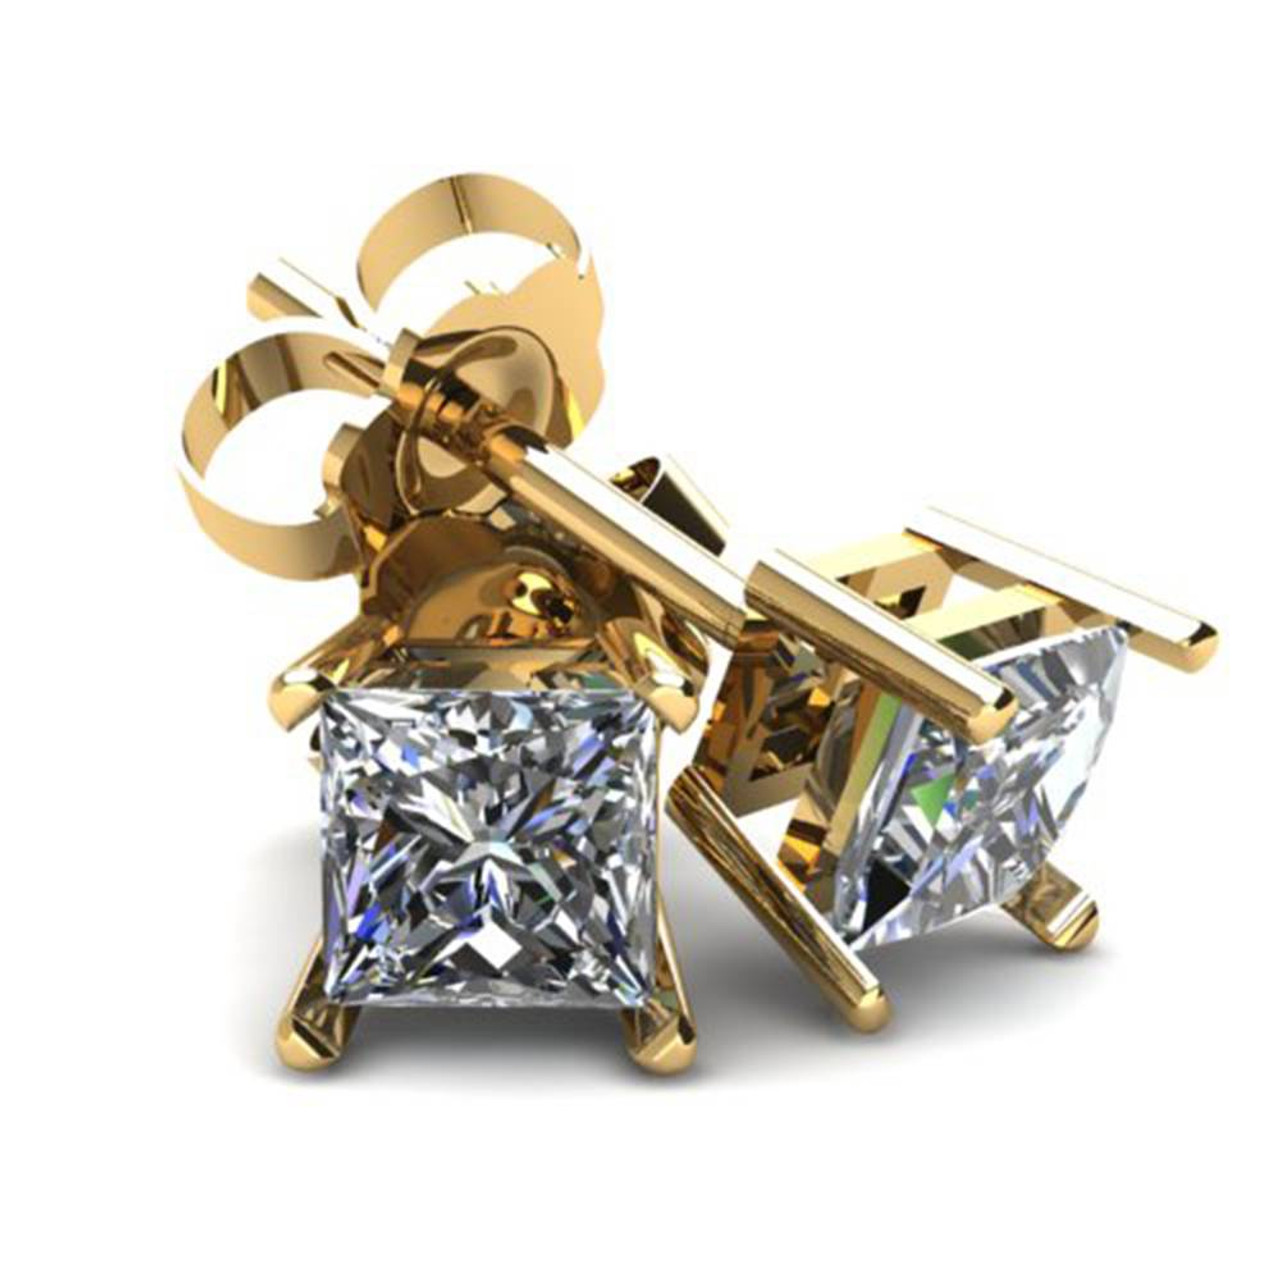 Buy 14k Yellow Gold Solitaire Square Princess-cut CZ Stud Earrings with  Secure Screw-backs (6mm) at Amazon.in